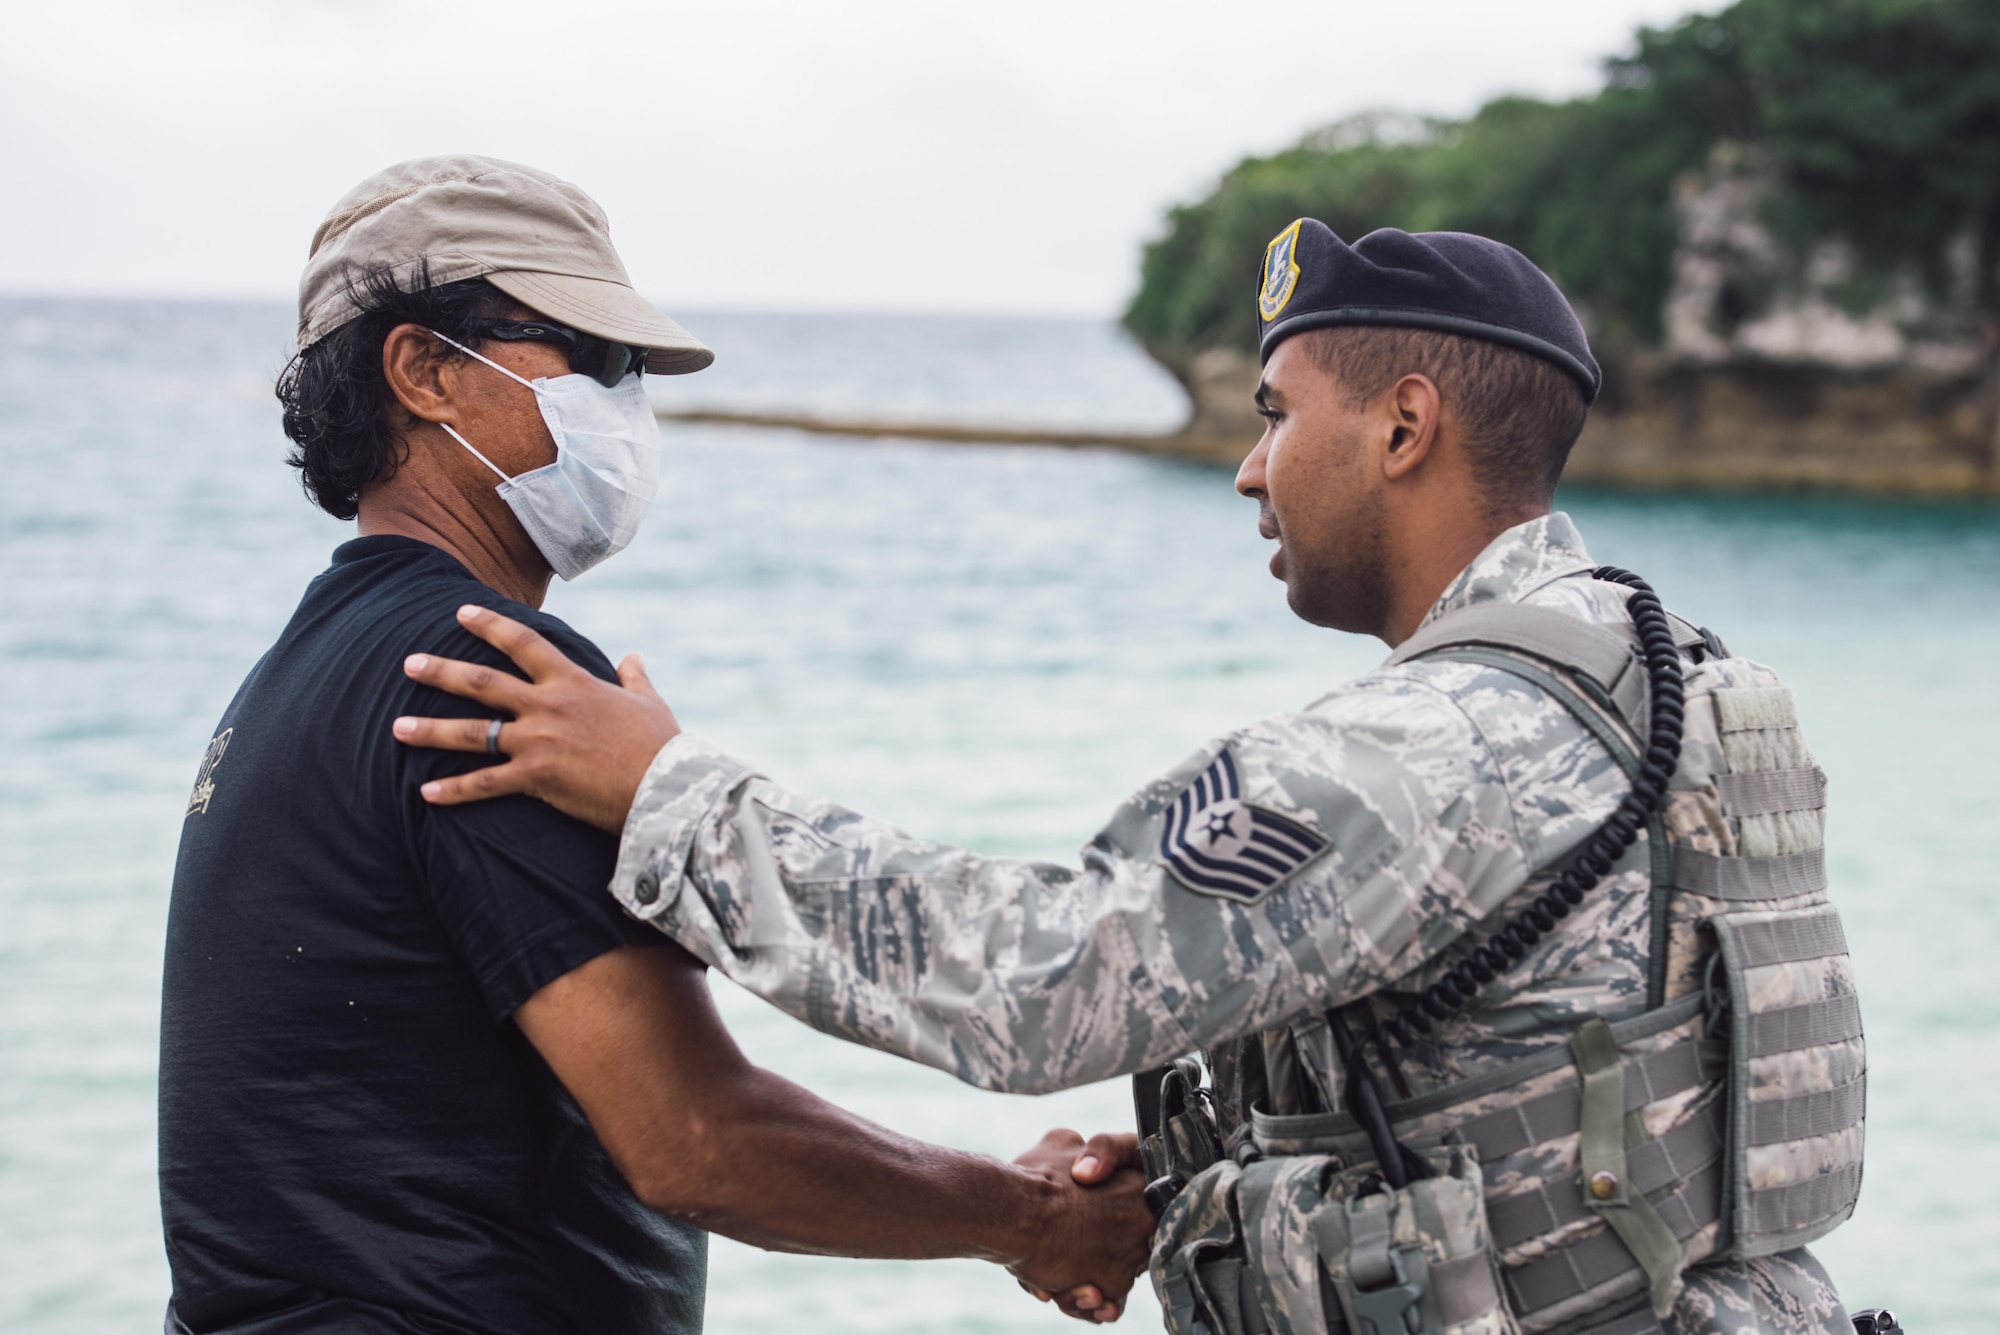 U.S. Air Force Tech. Sgt. Oswaldo Cerrato, 18th Security Forces Squadron flight lead, thanks U.S. Air Force retired Master Sgt. David Lacar for his efforts in the rescue of a dwarf sperm whale April 17, 2017, at Kadena Marina, Japan. Lacar was relieved by 18th Force Support Squadron divers after supporting the injured dwarf sperm whale for more than two hours. (U.S. Air Force photo by Senior Airman Omari Bernard/Released)